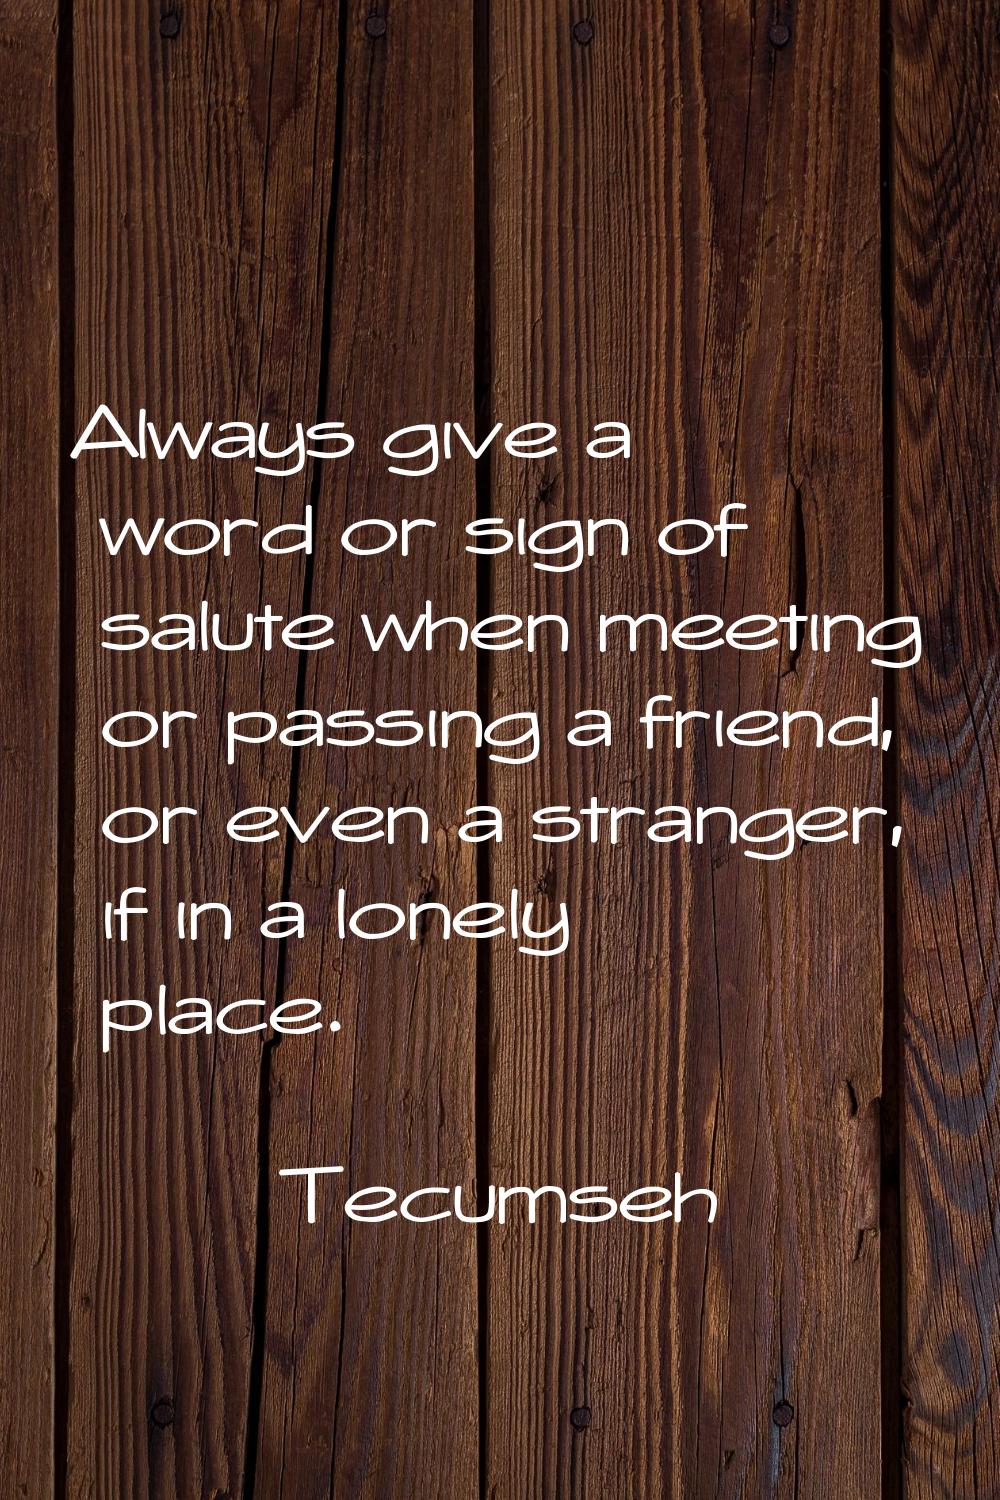 Always give a word or sign of salute when meeting or passing a friend, or even a stranger, if in a 